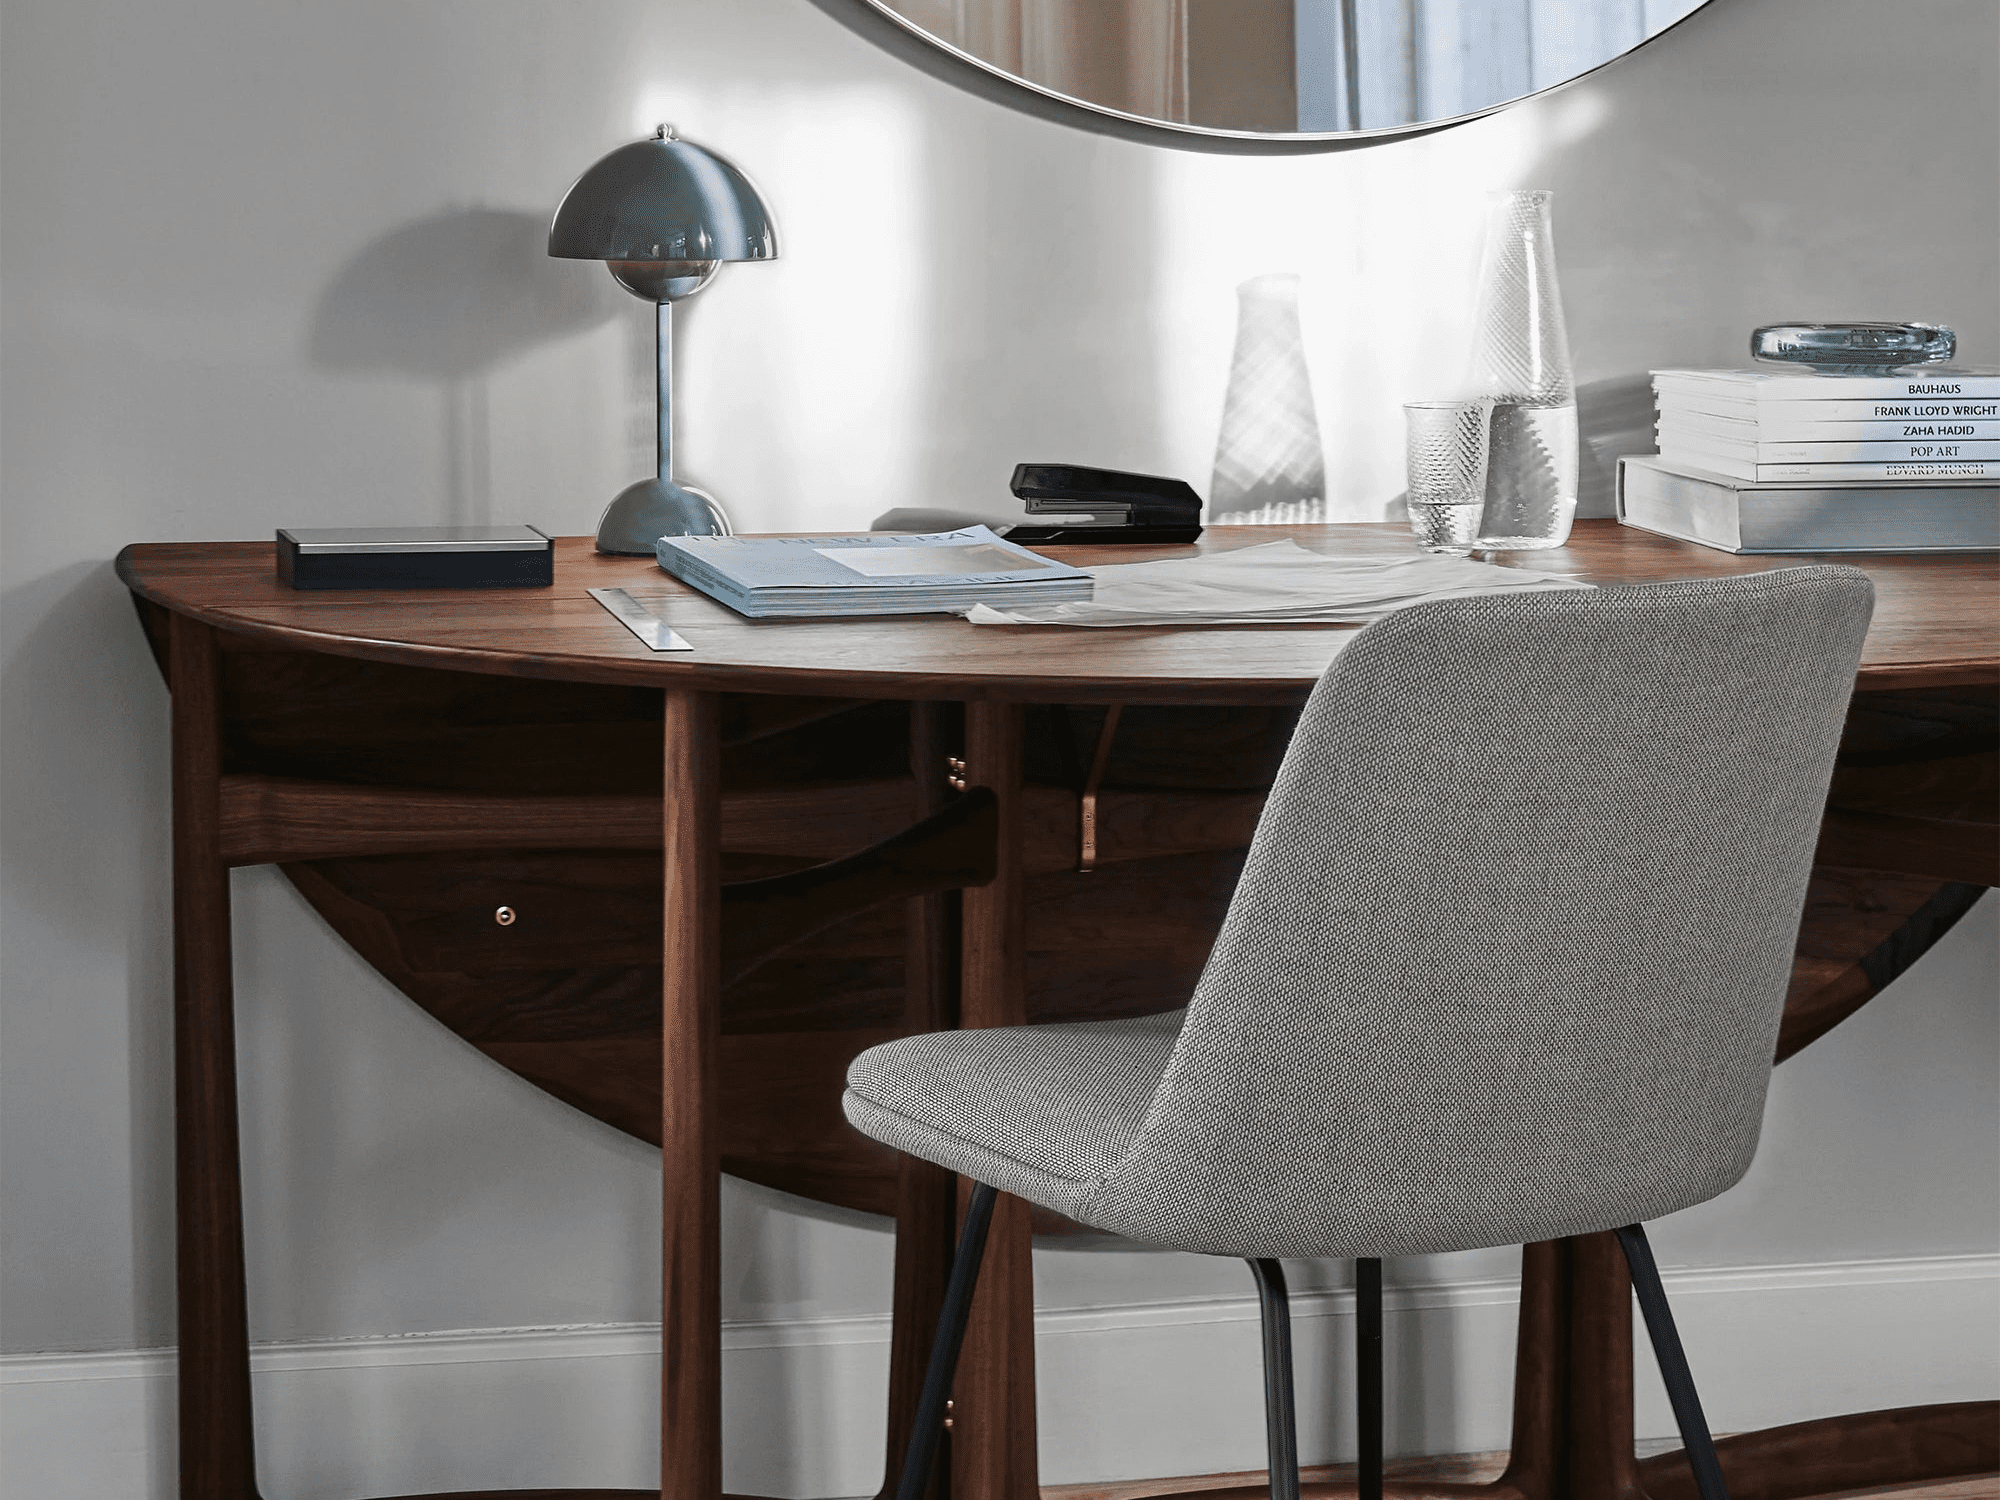 Best Table Lamp for Reading